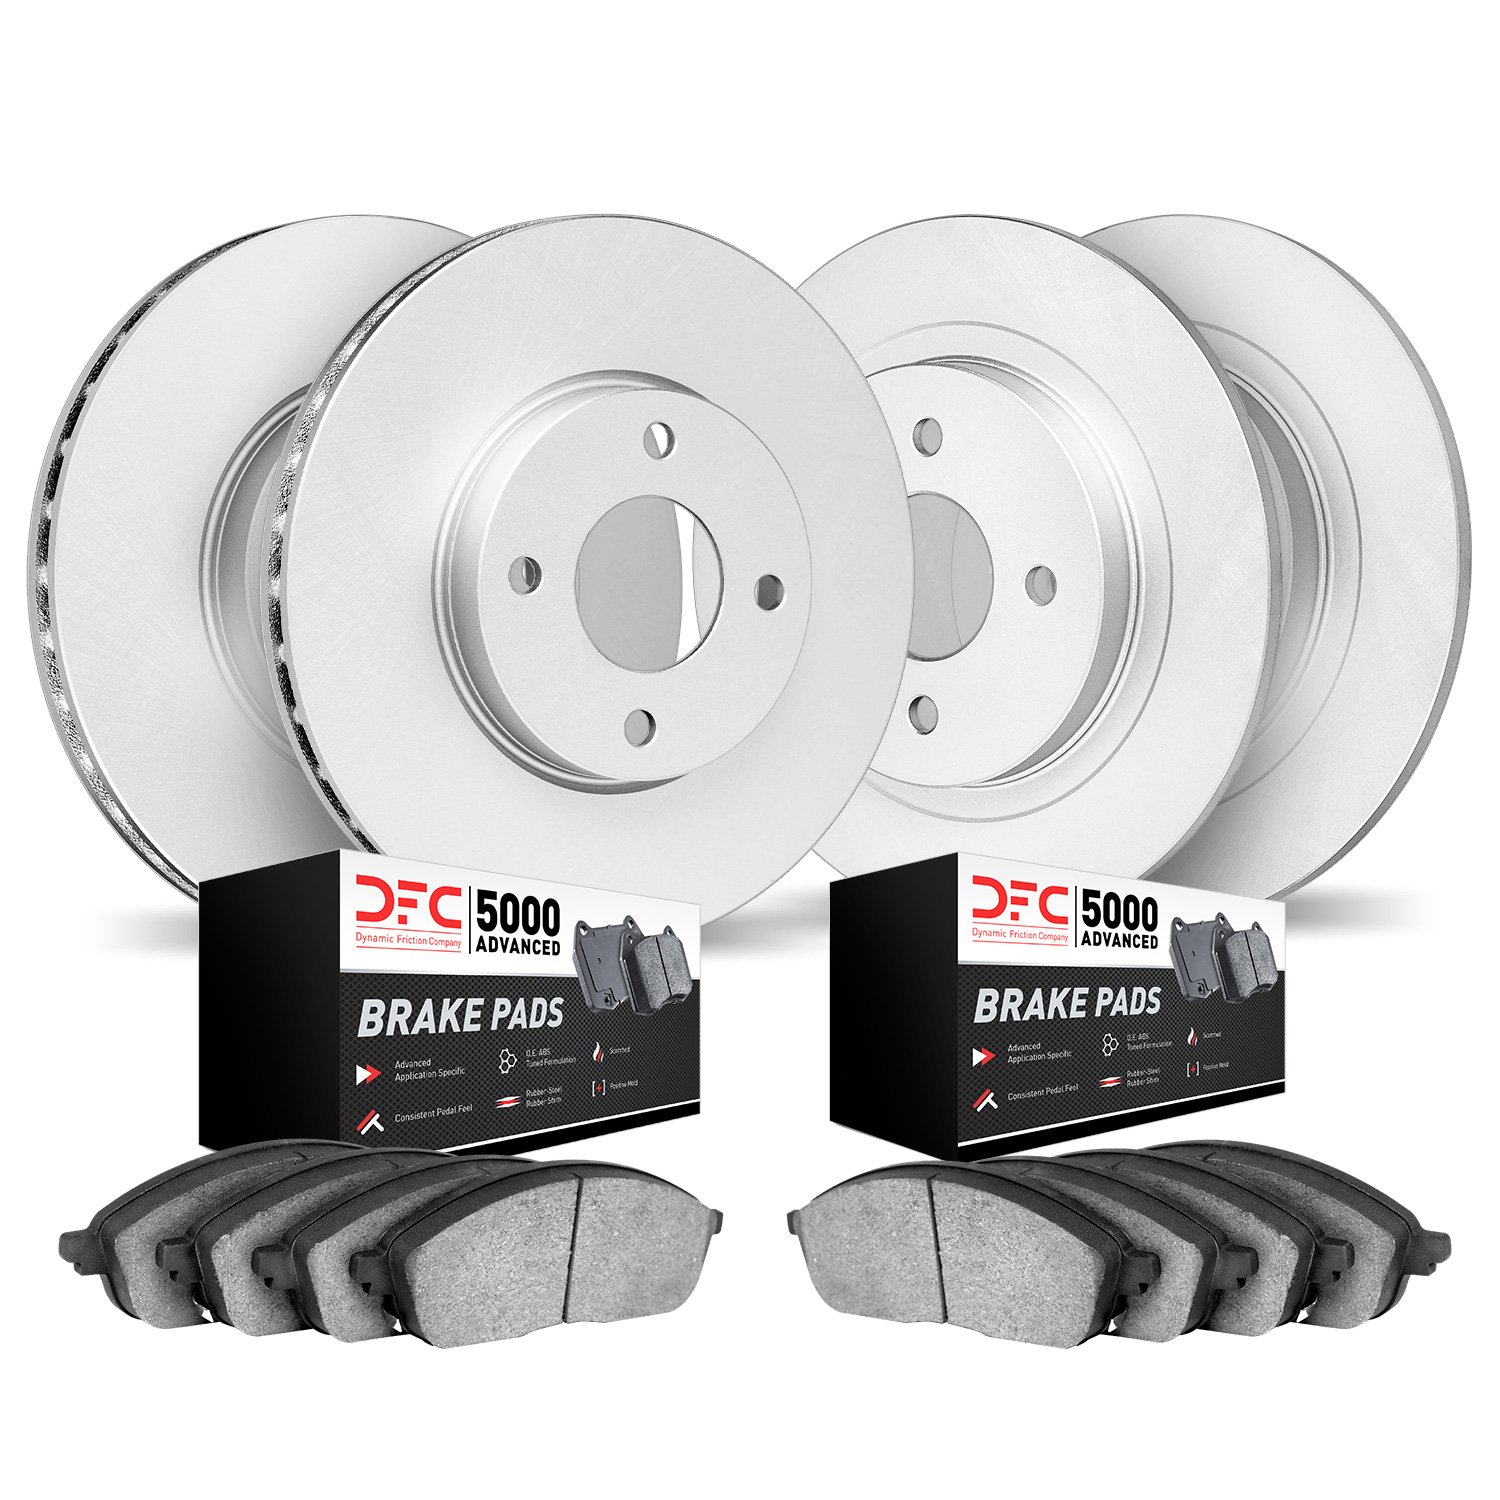 4504-54288 Geospec Brake Rotors w/5000 Advanced Brake Pads Kit, Fits Select Ford/Lincoln/Mercury/Mazda, Position: Front and Rear